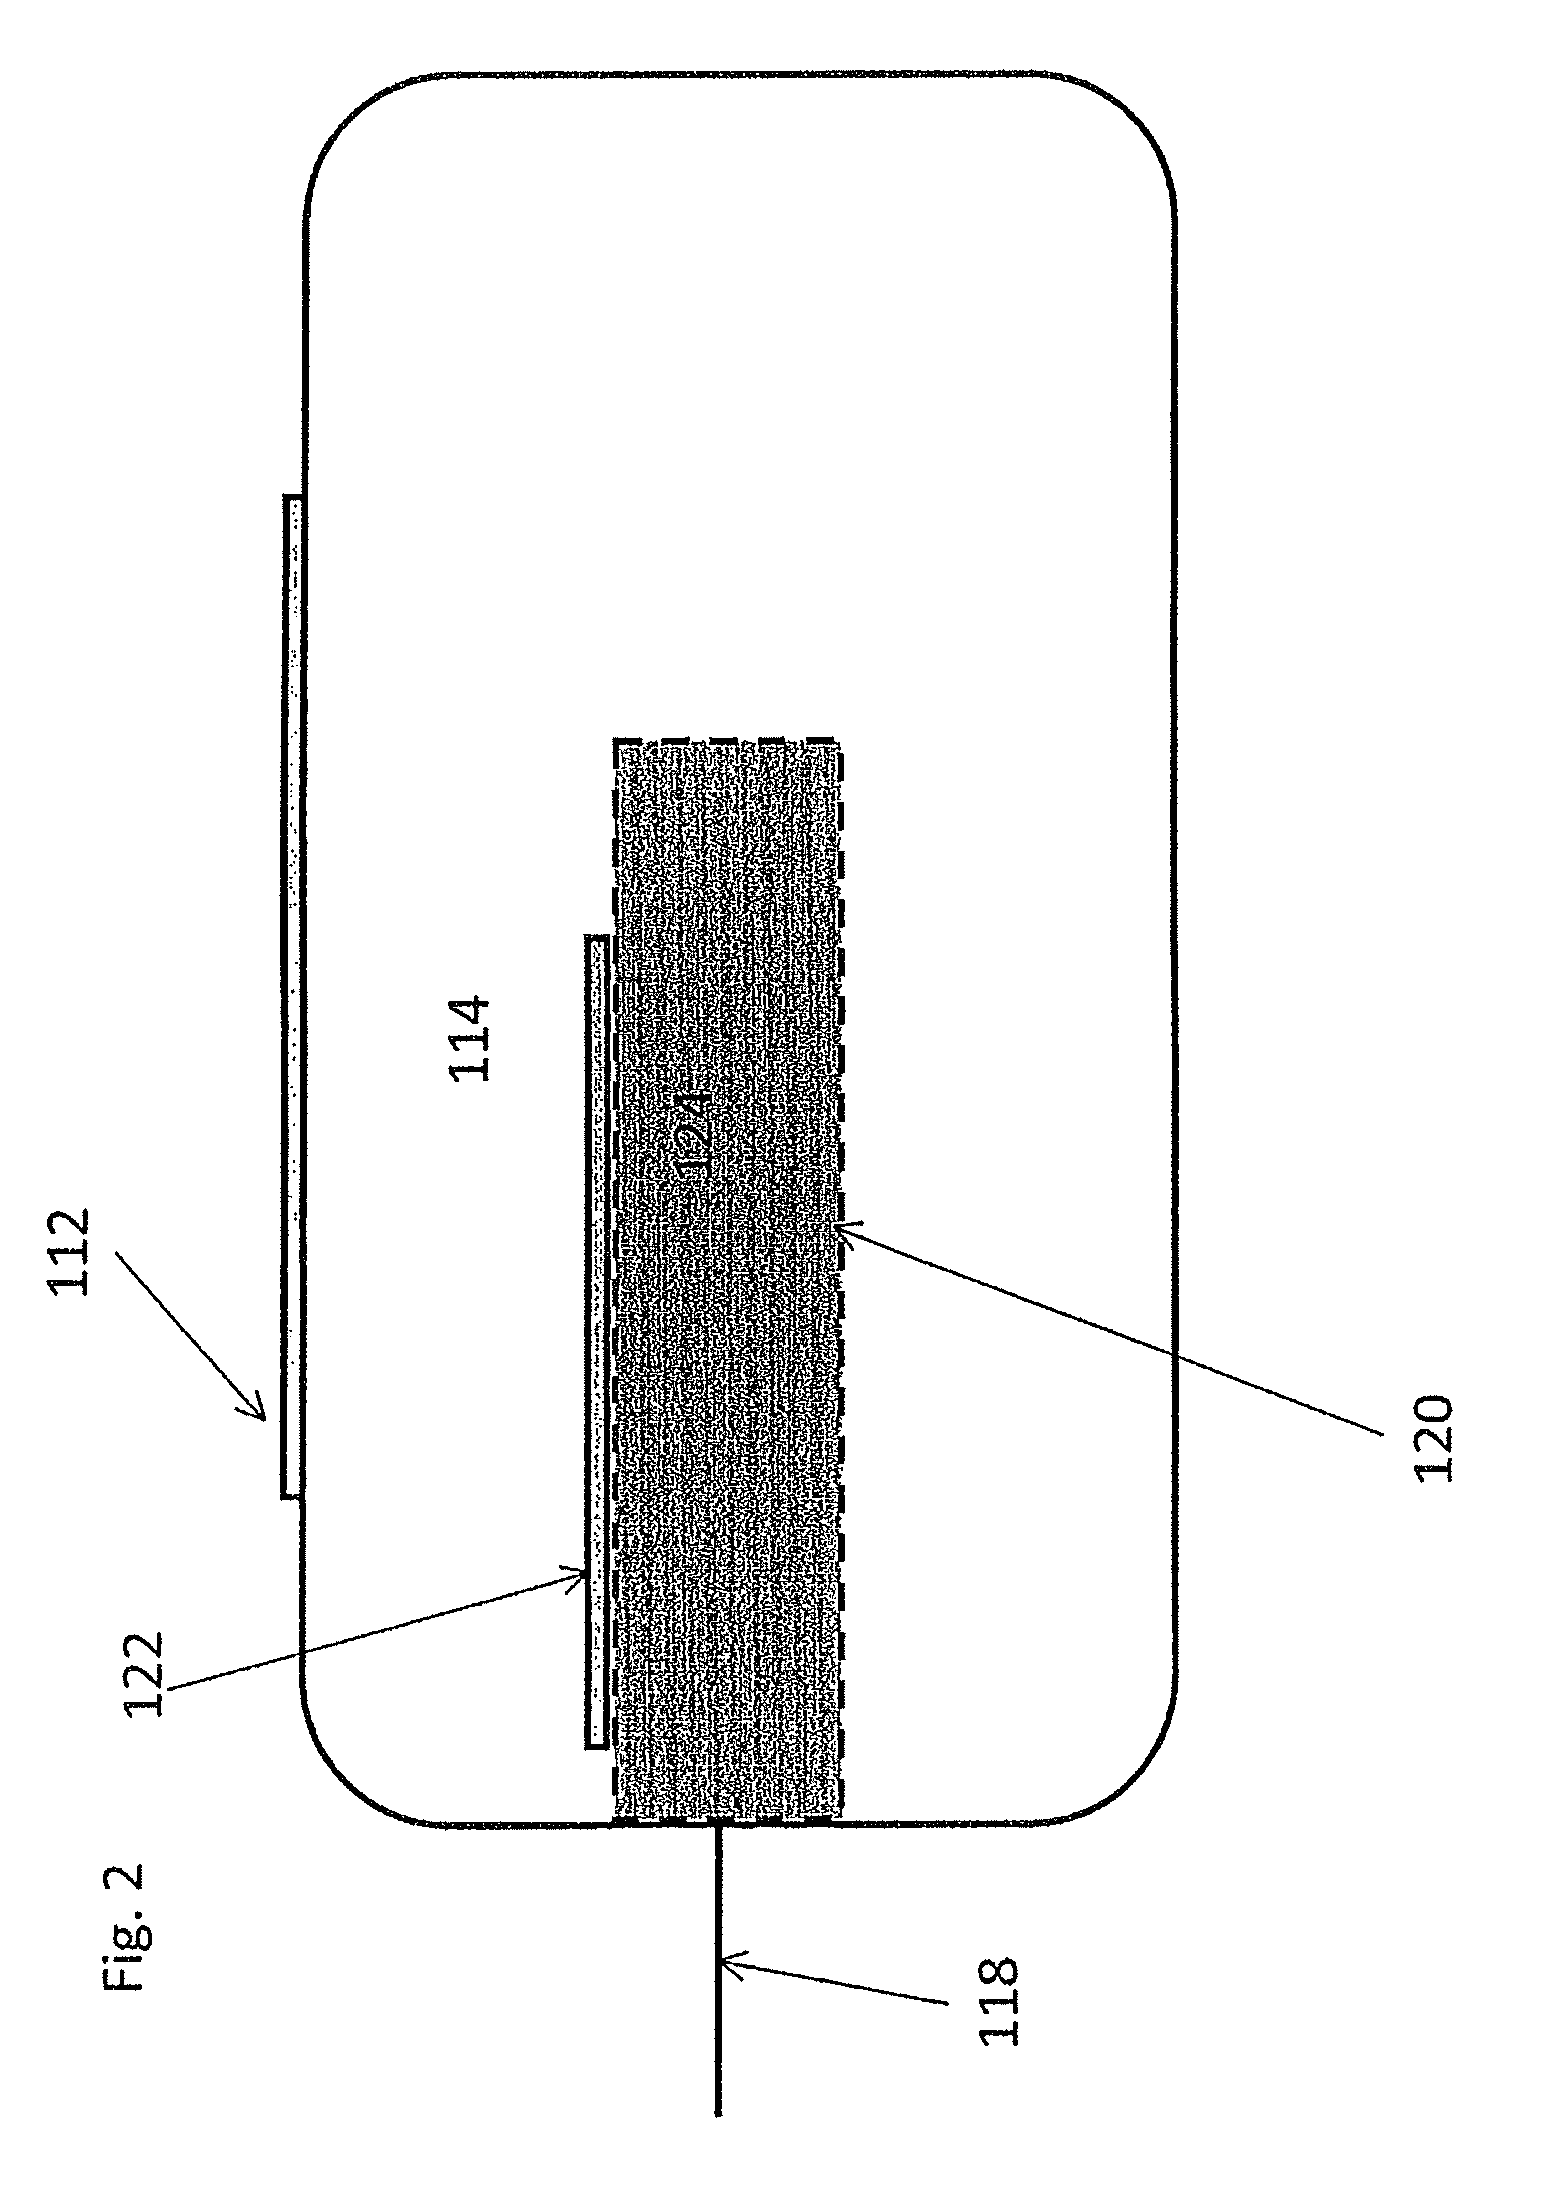 Method for storing and delivering ammonia from solid storage materials using a vacuum pump